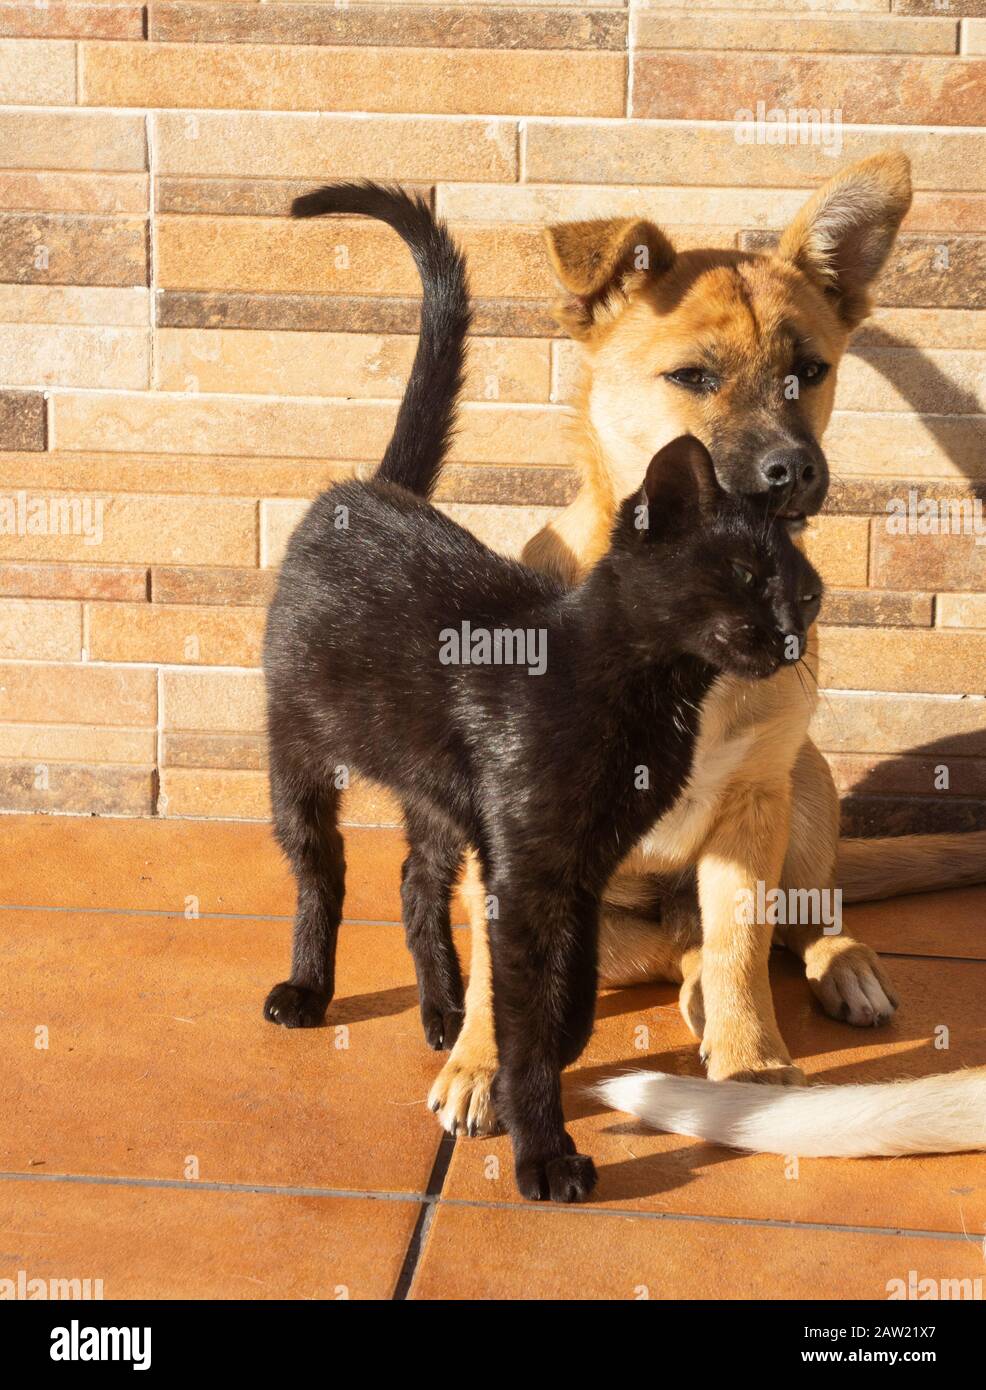 Dog and a cat together Stock Photo